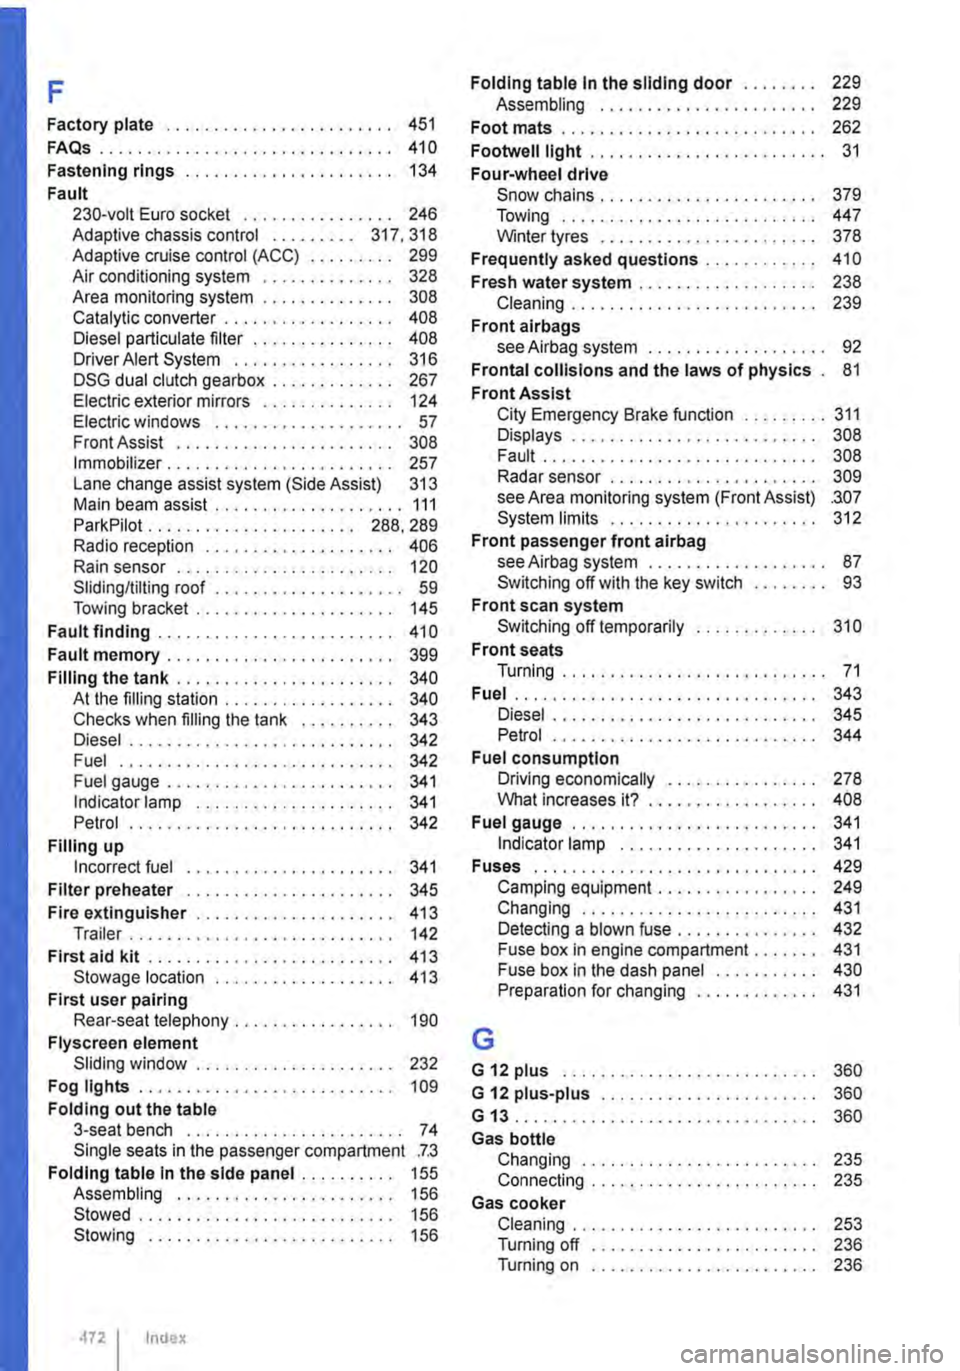 VOLKSWAGEN TRANSPORTER 2012  Owners Manual F 
Factory plate . . . . . . . . . . . . . . . . . . . . . . . . 451 
FAQs . . . . . . . . . . . . . . . . . . . . . . . . . . . . . . . 410 
Fastening rings . . . . . . . . . . . . . . . . . . • . 